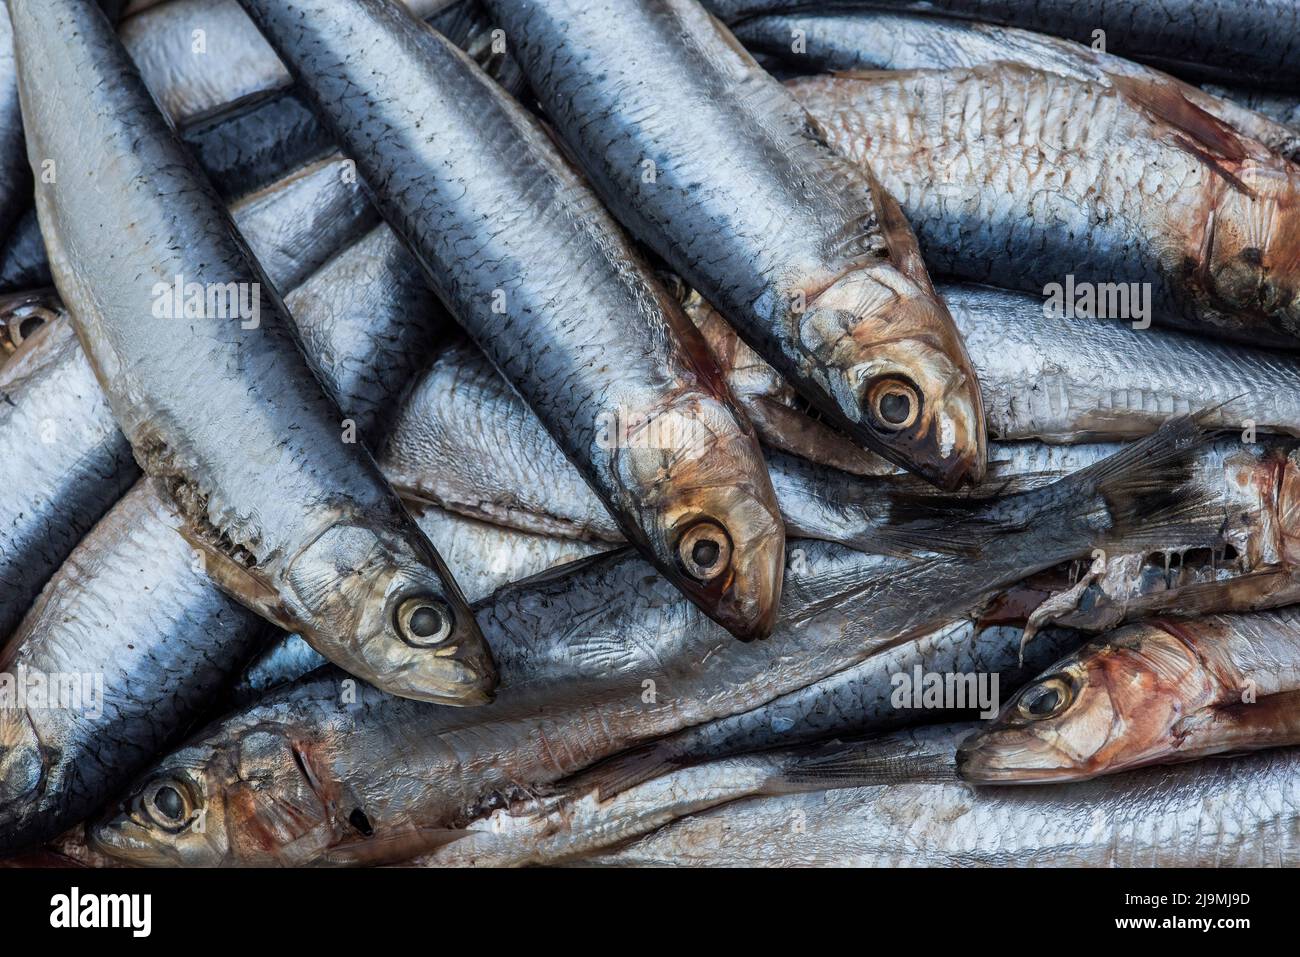 Sardines / pilchards - Sardina pilchardus. Home cooking / fishmongers. Over fishing. Fishery policy. Micro-plastic pollution of the oceans. Stock Photo